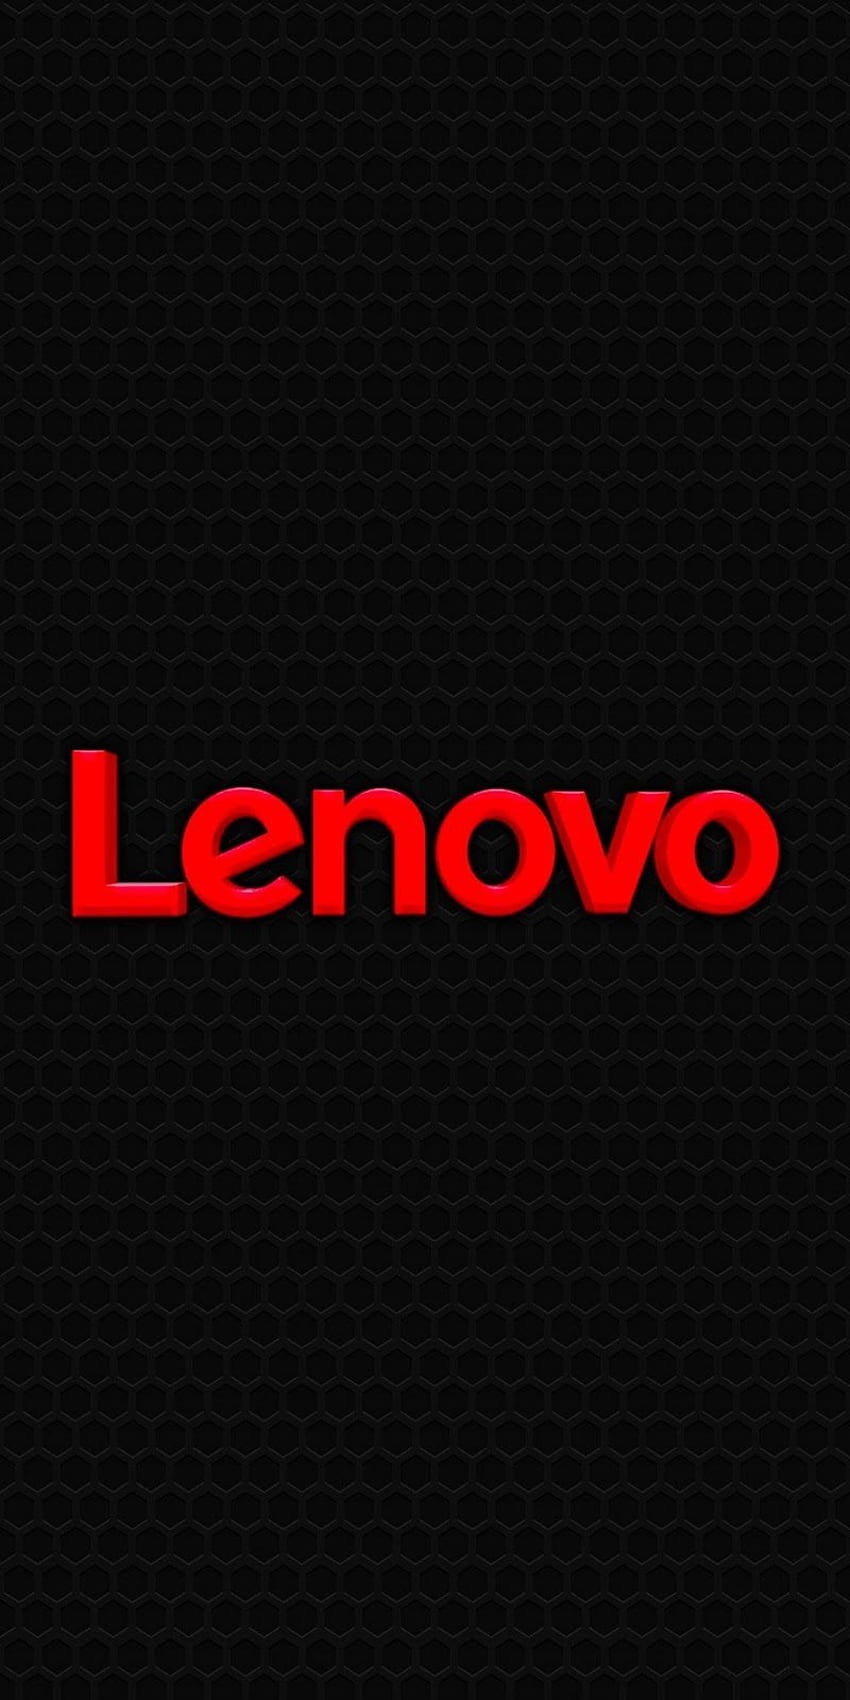  lenovo z6 youth mobile stock wallpaper 02  720 x 1560  android   iphone hd wallpaper background download HD Photos  Wallpapers 0 Images   Page 1